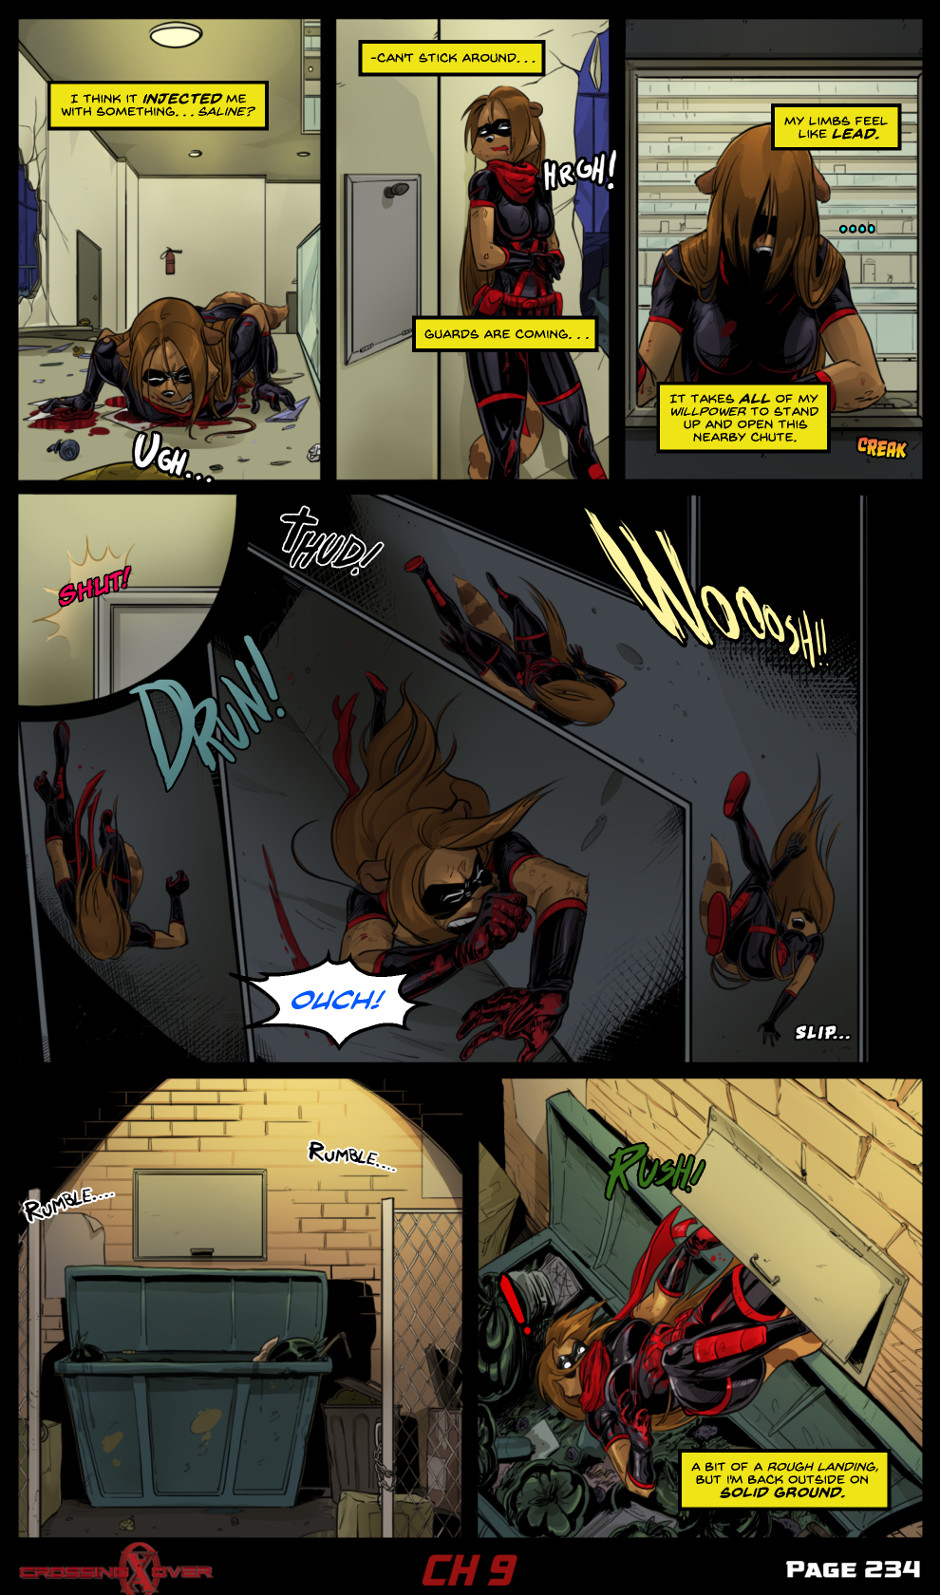 Page 234 (Ch 9)